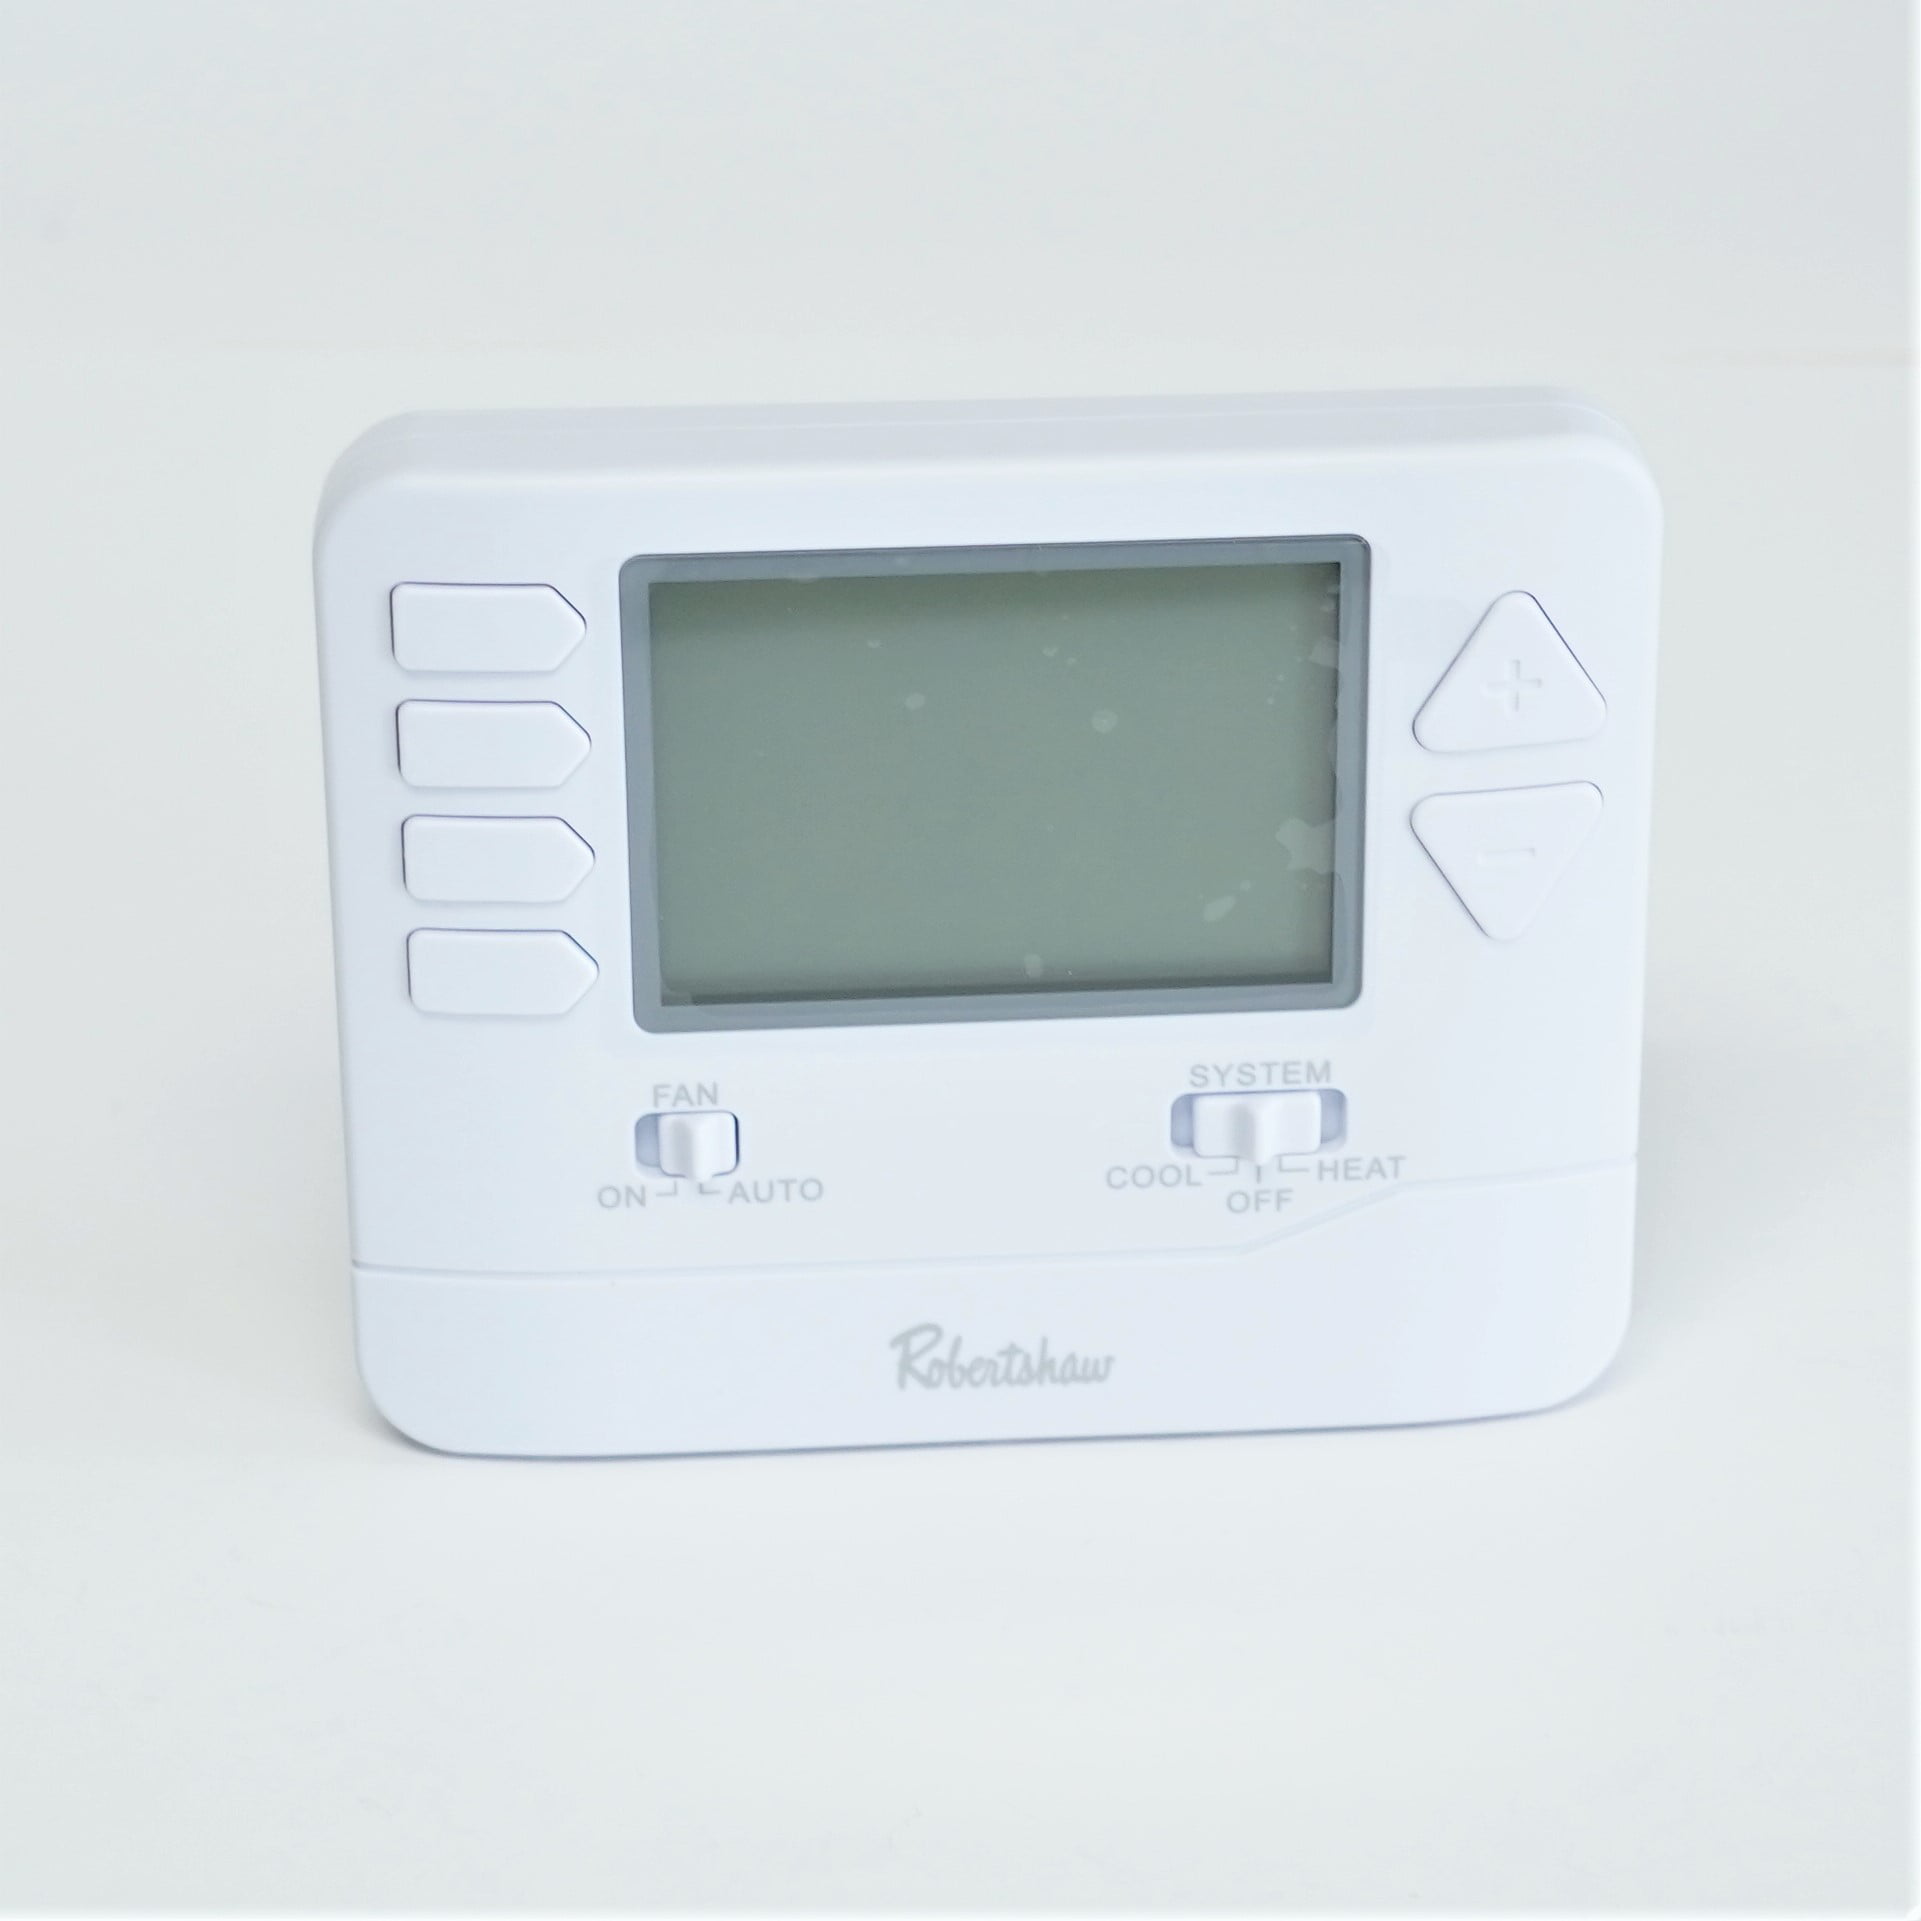 Robertshaw RS5110 Digital Porgrammable Thermostat 